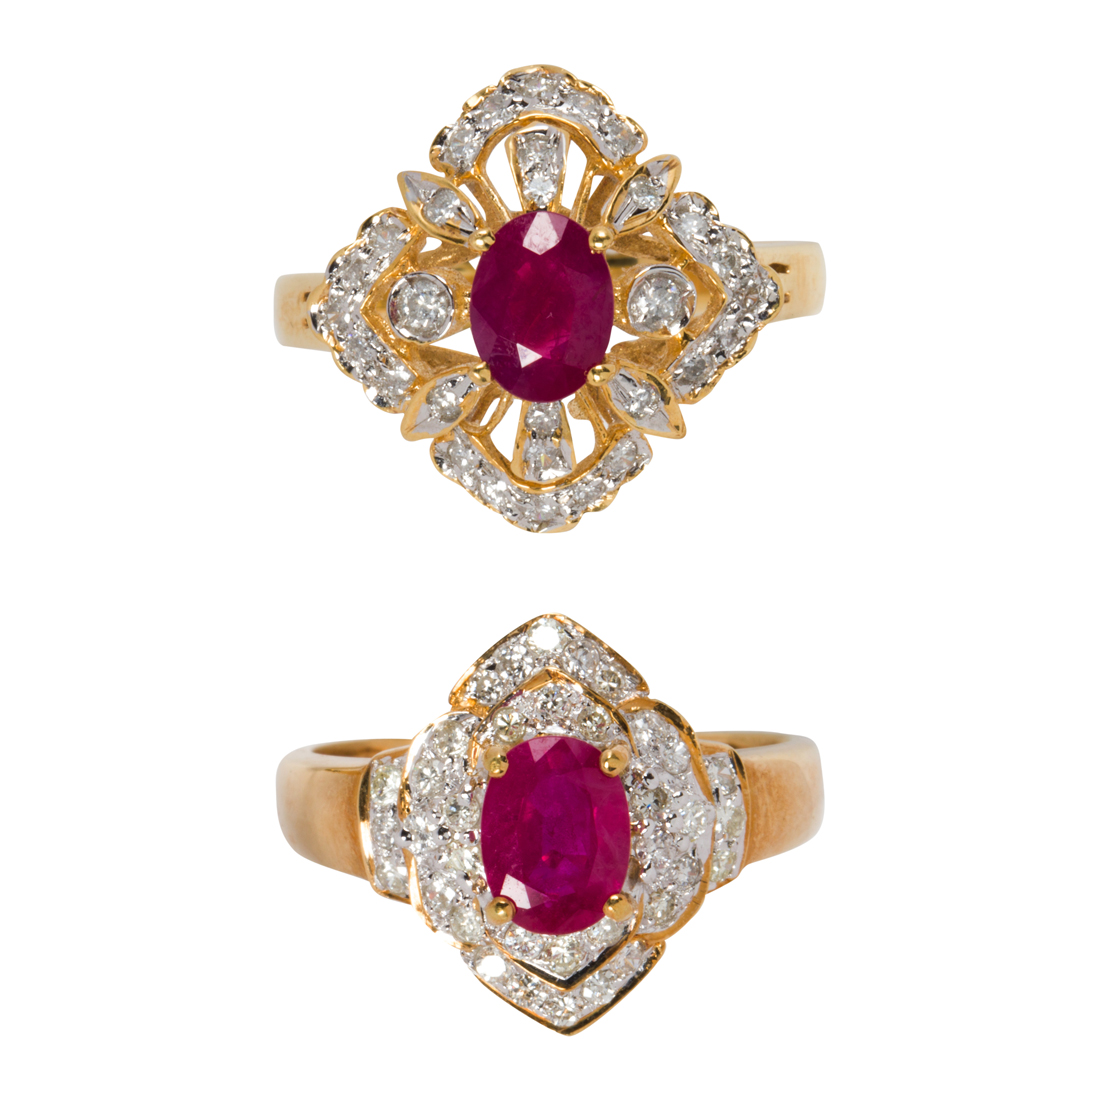 TWO DIAMOND, RUBY AND 18K GOLD